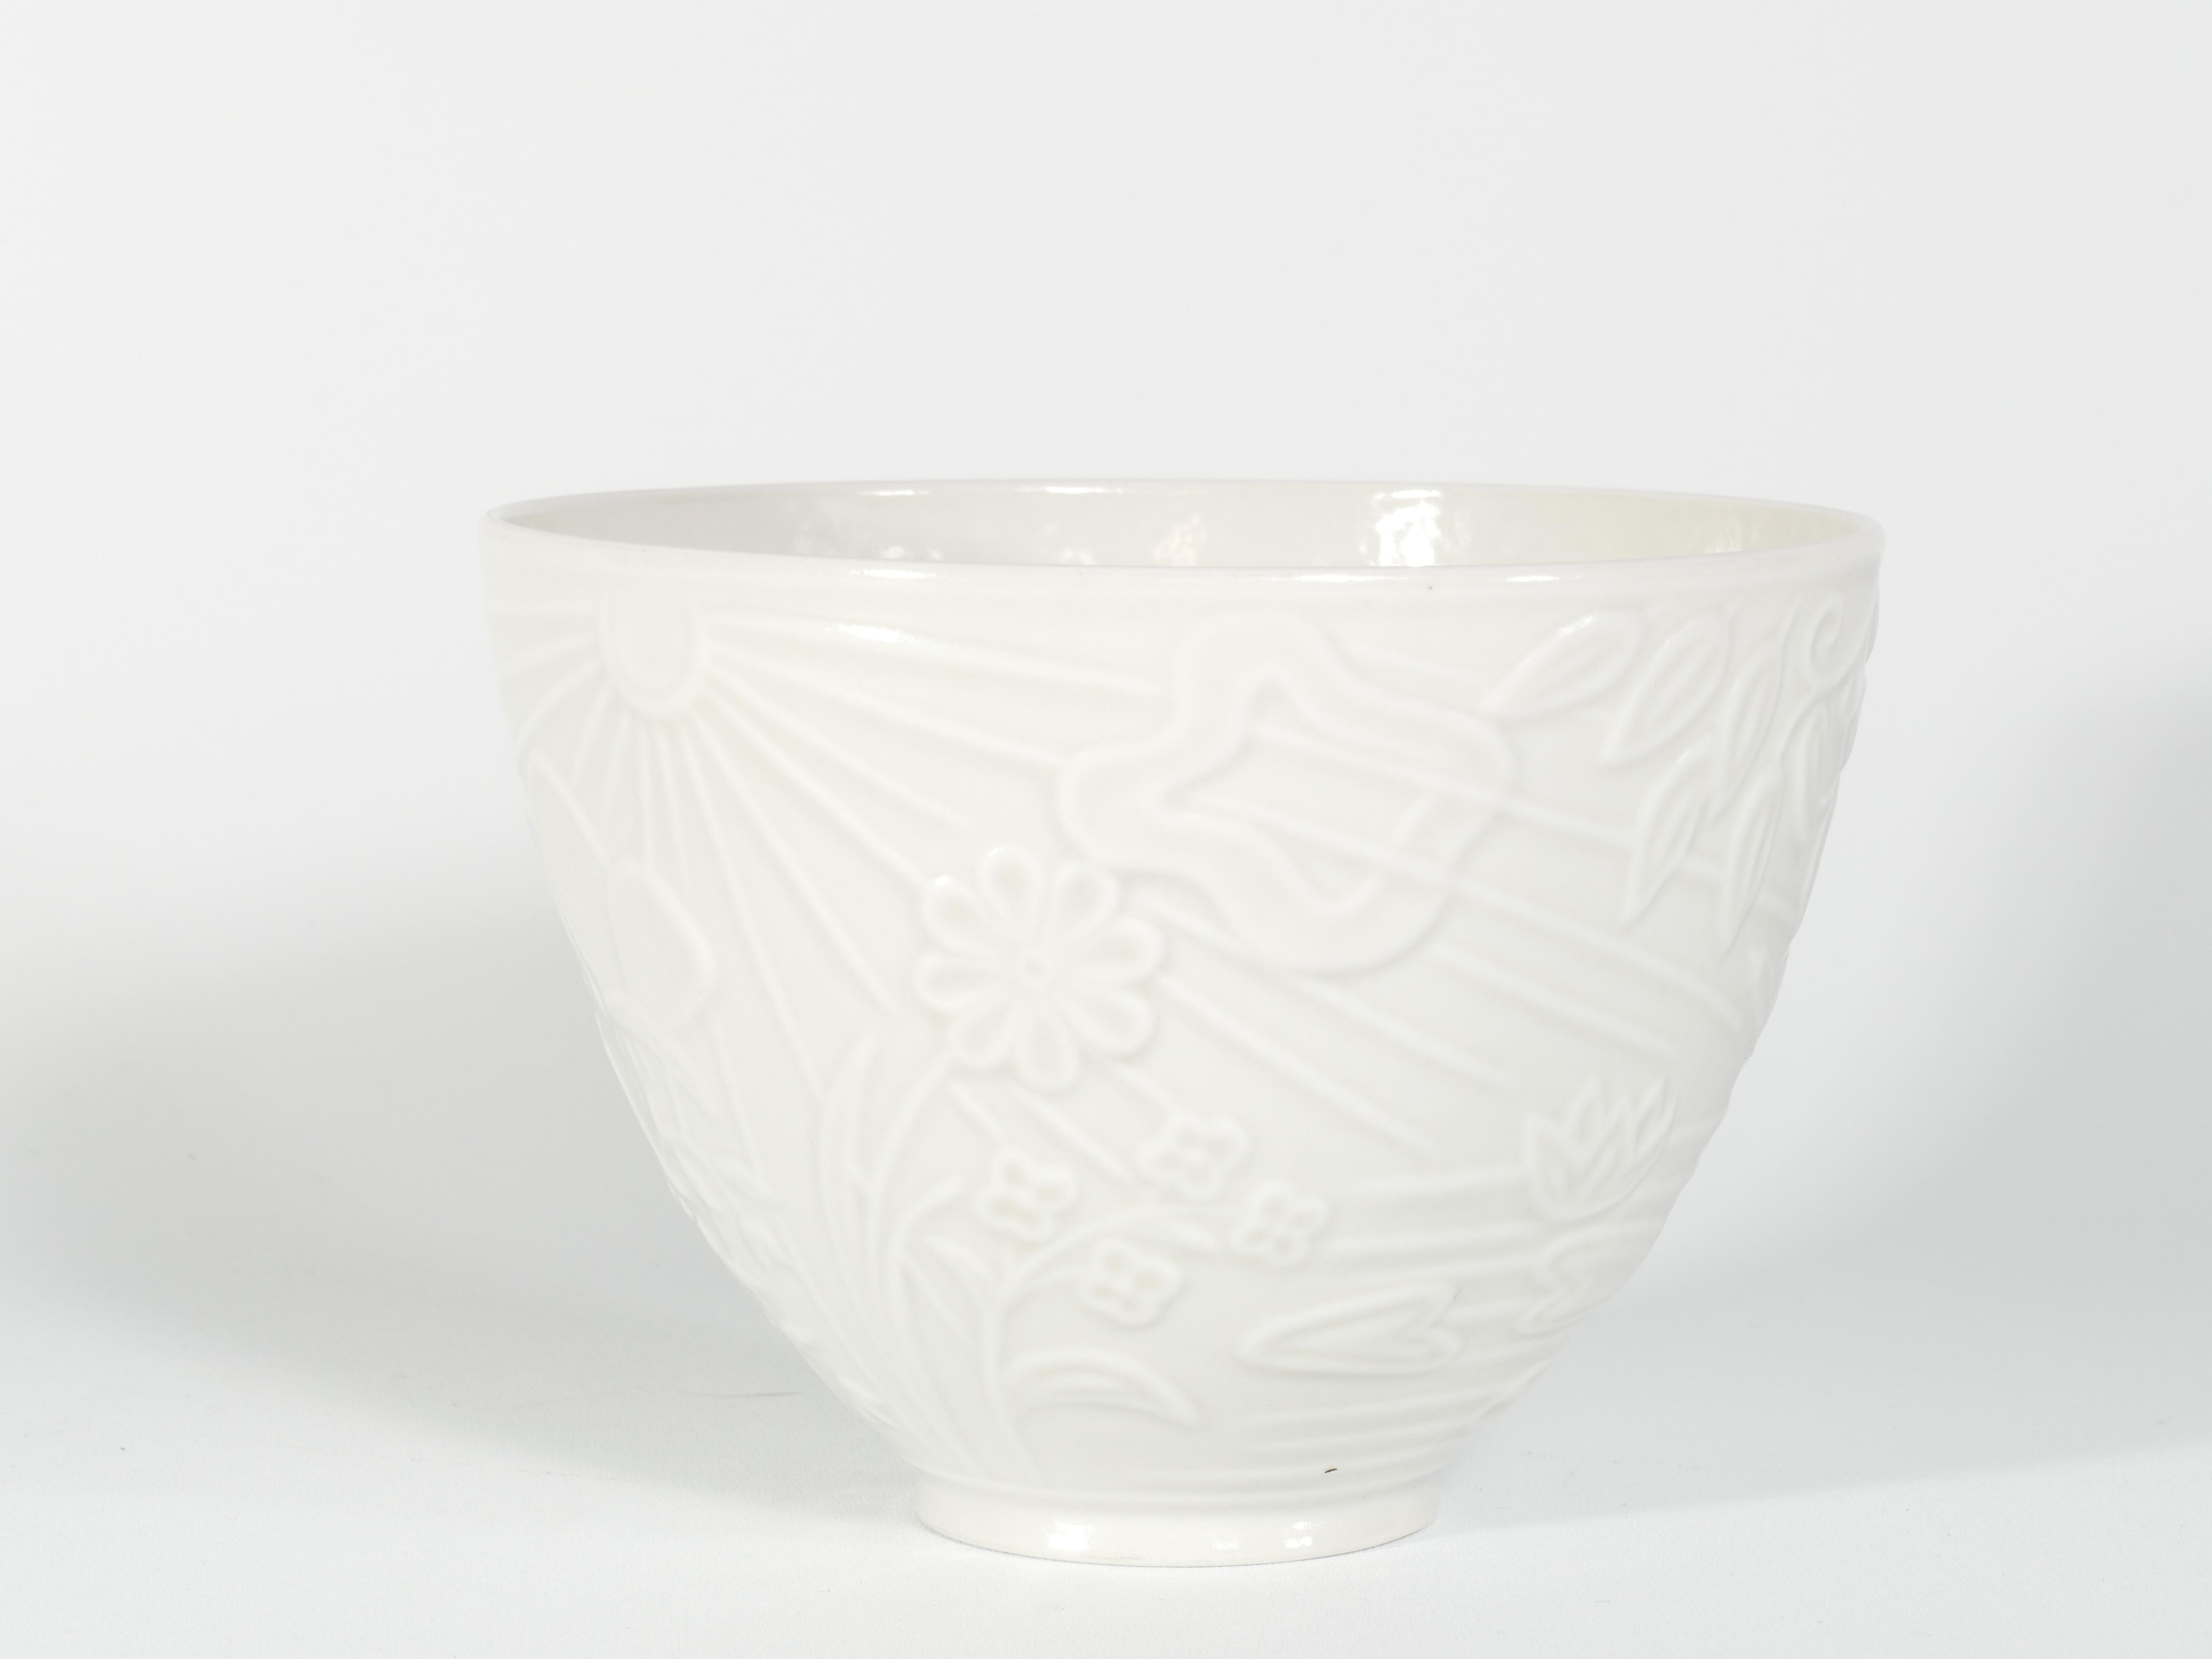 This is a thin, very rare, translucent white porcelain bowl designed by Gunnar Nylund for ALP Lidköping/Rörstrand. The bowl features a lovely relief decoration depicting the sun, clouds, water with waterlilies and reed, a swallow, branches from a